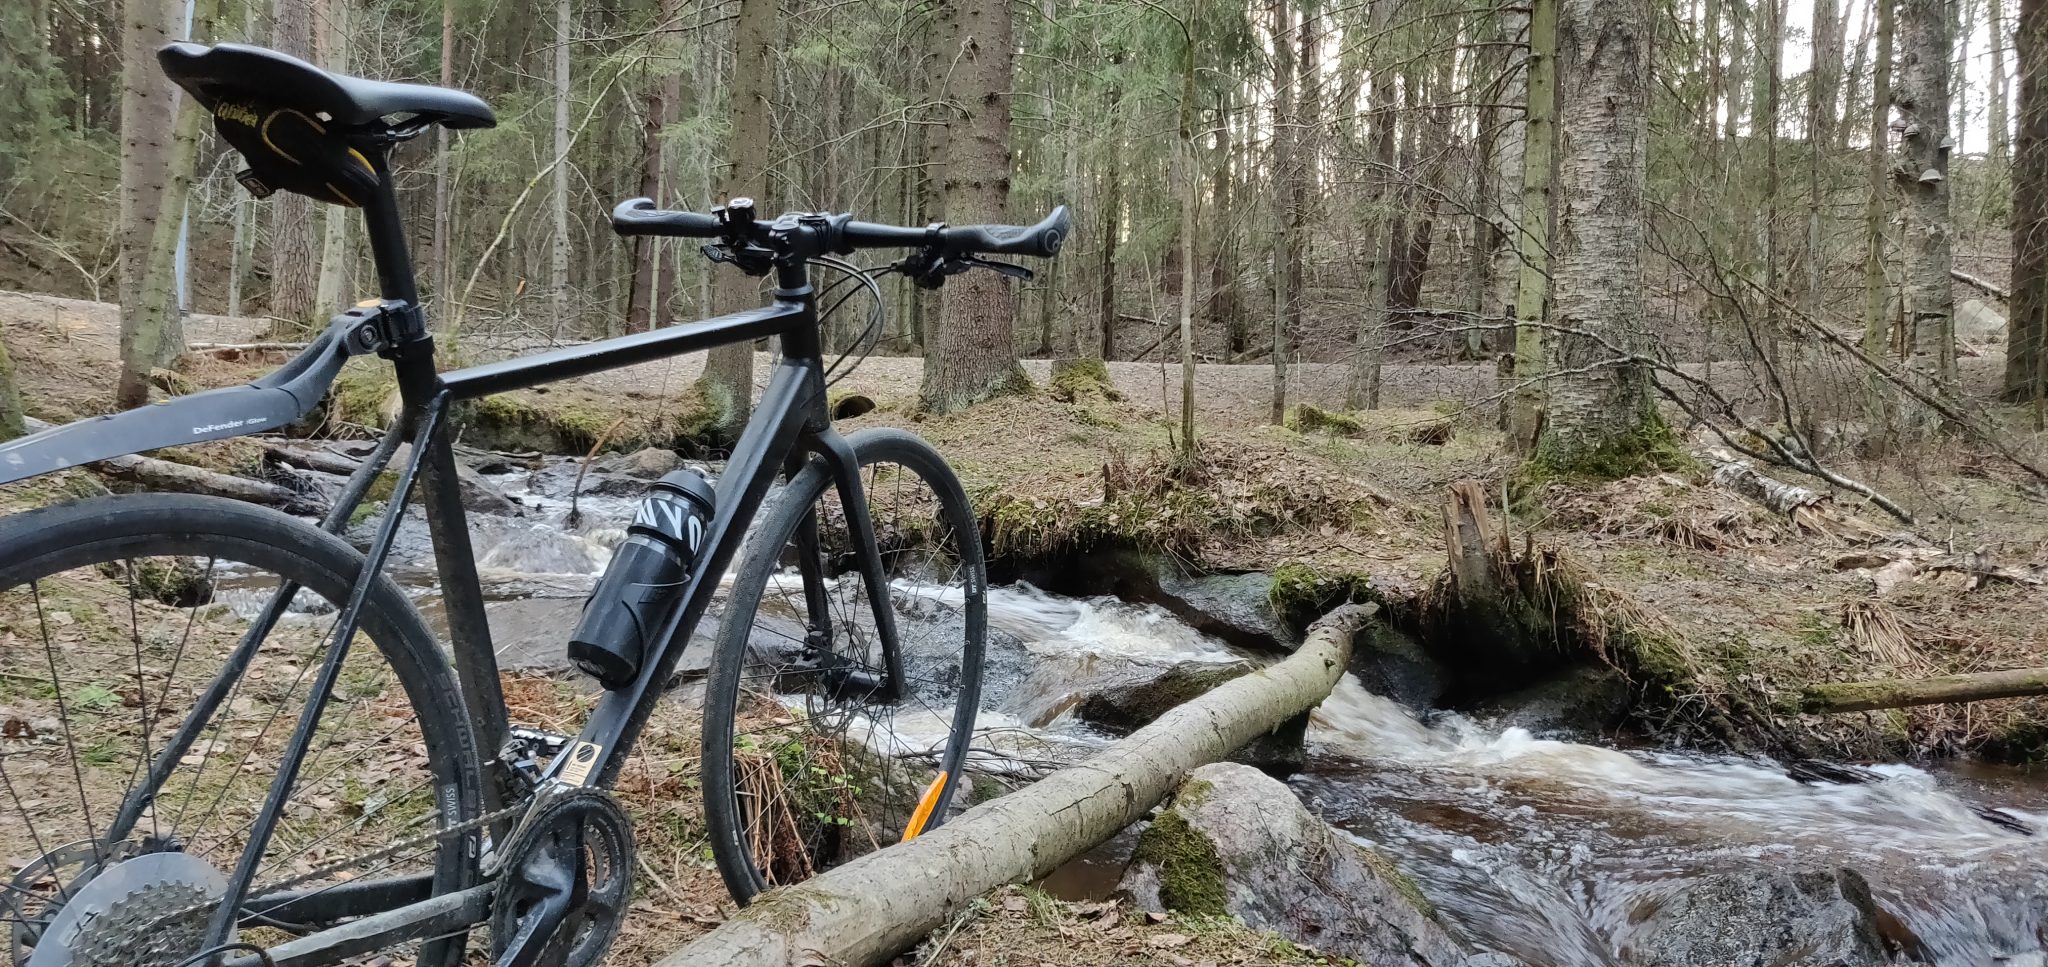 Bicycle and small stream in forest